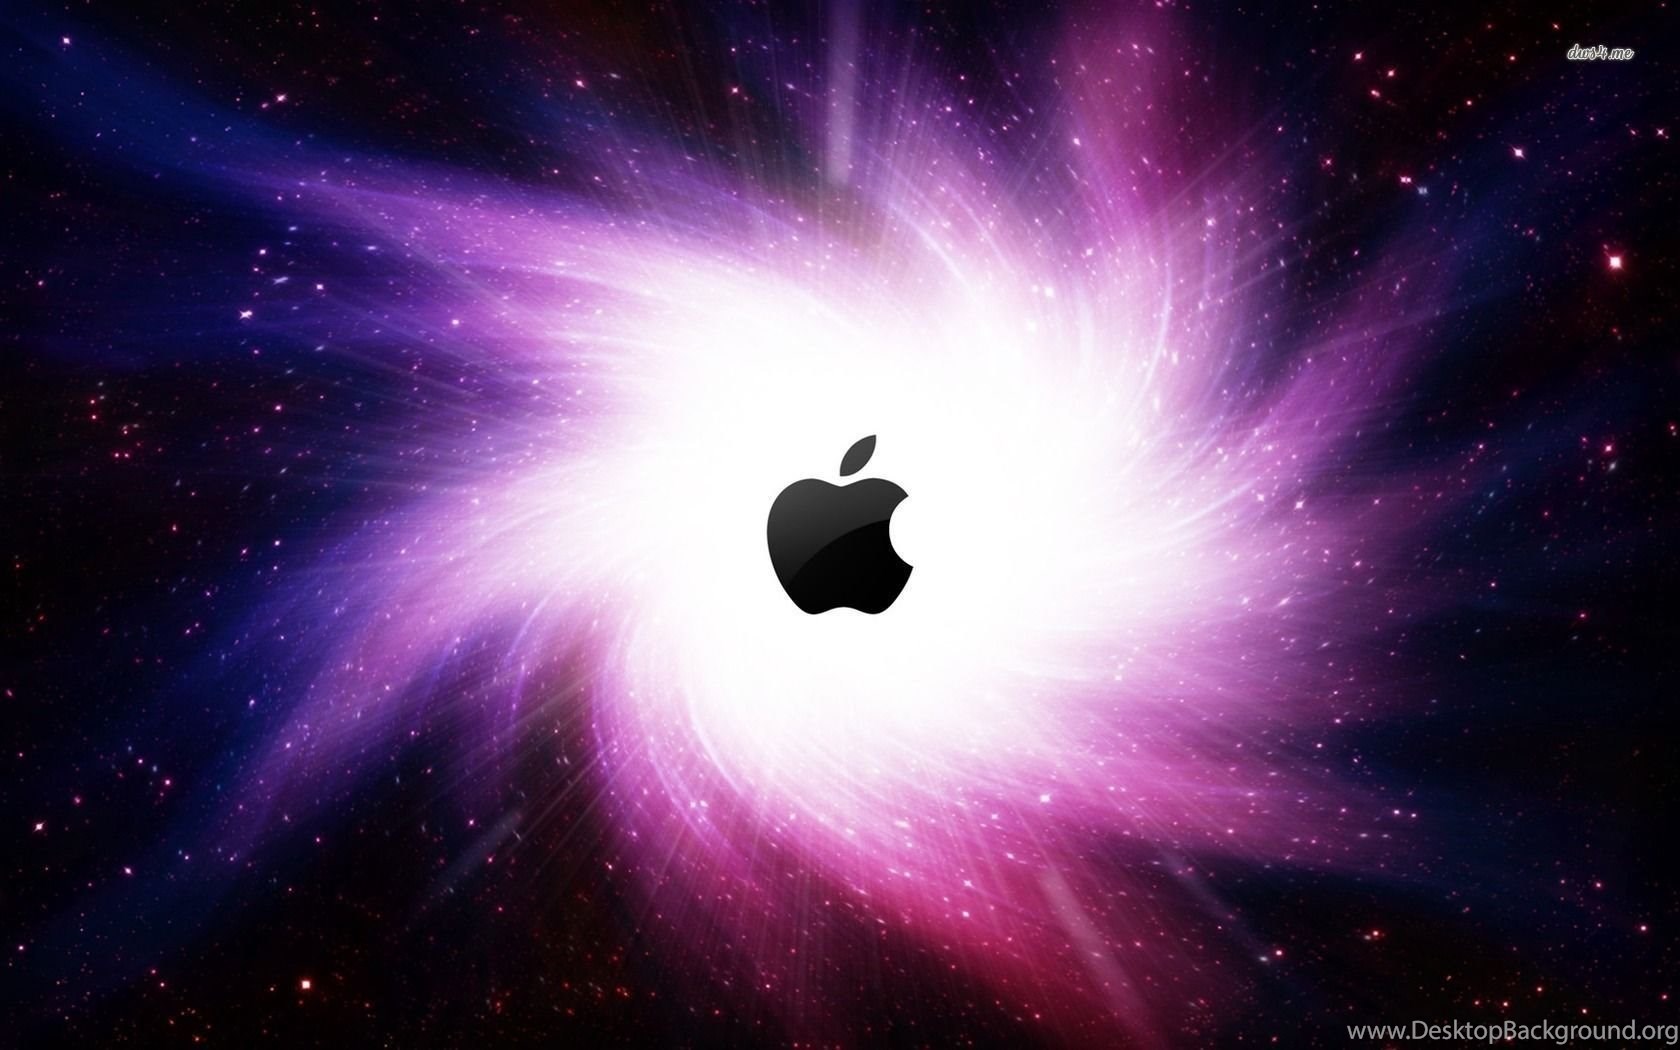 Apple In The Galaxy Wallpapers Computer Wallpapers Desktop Background